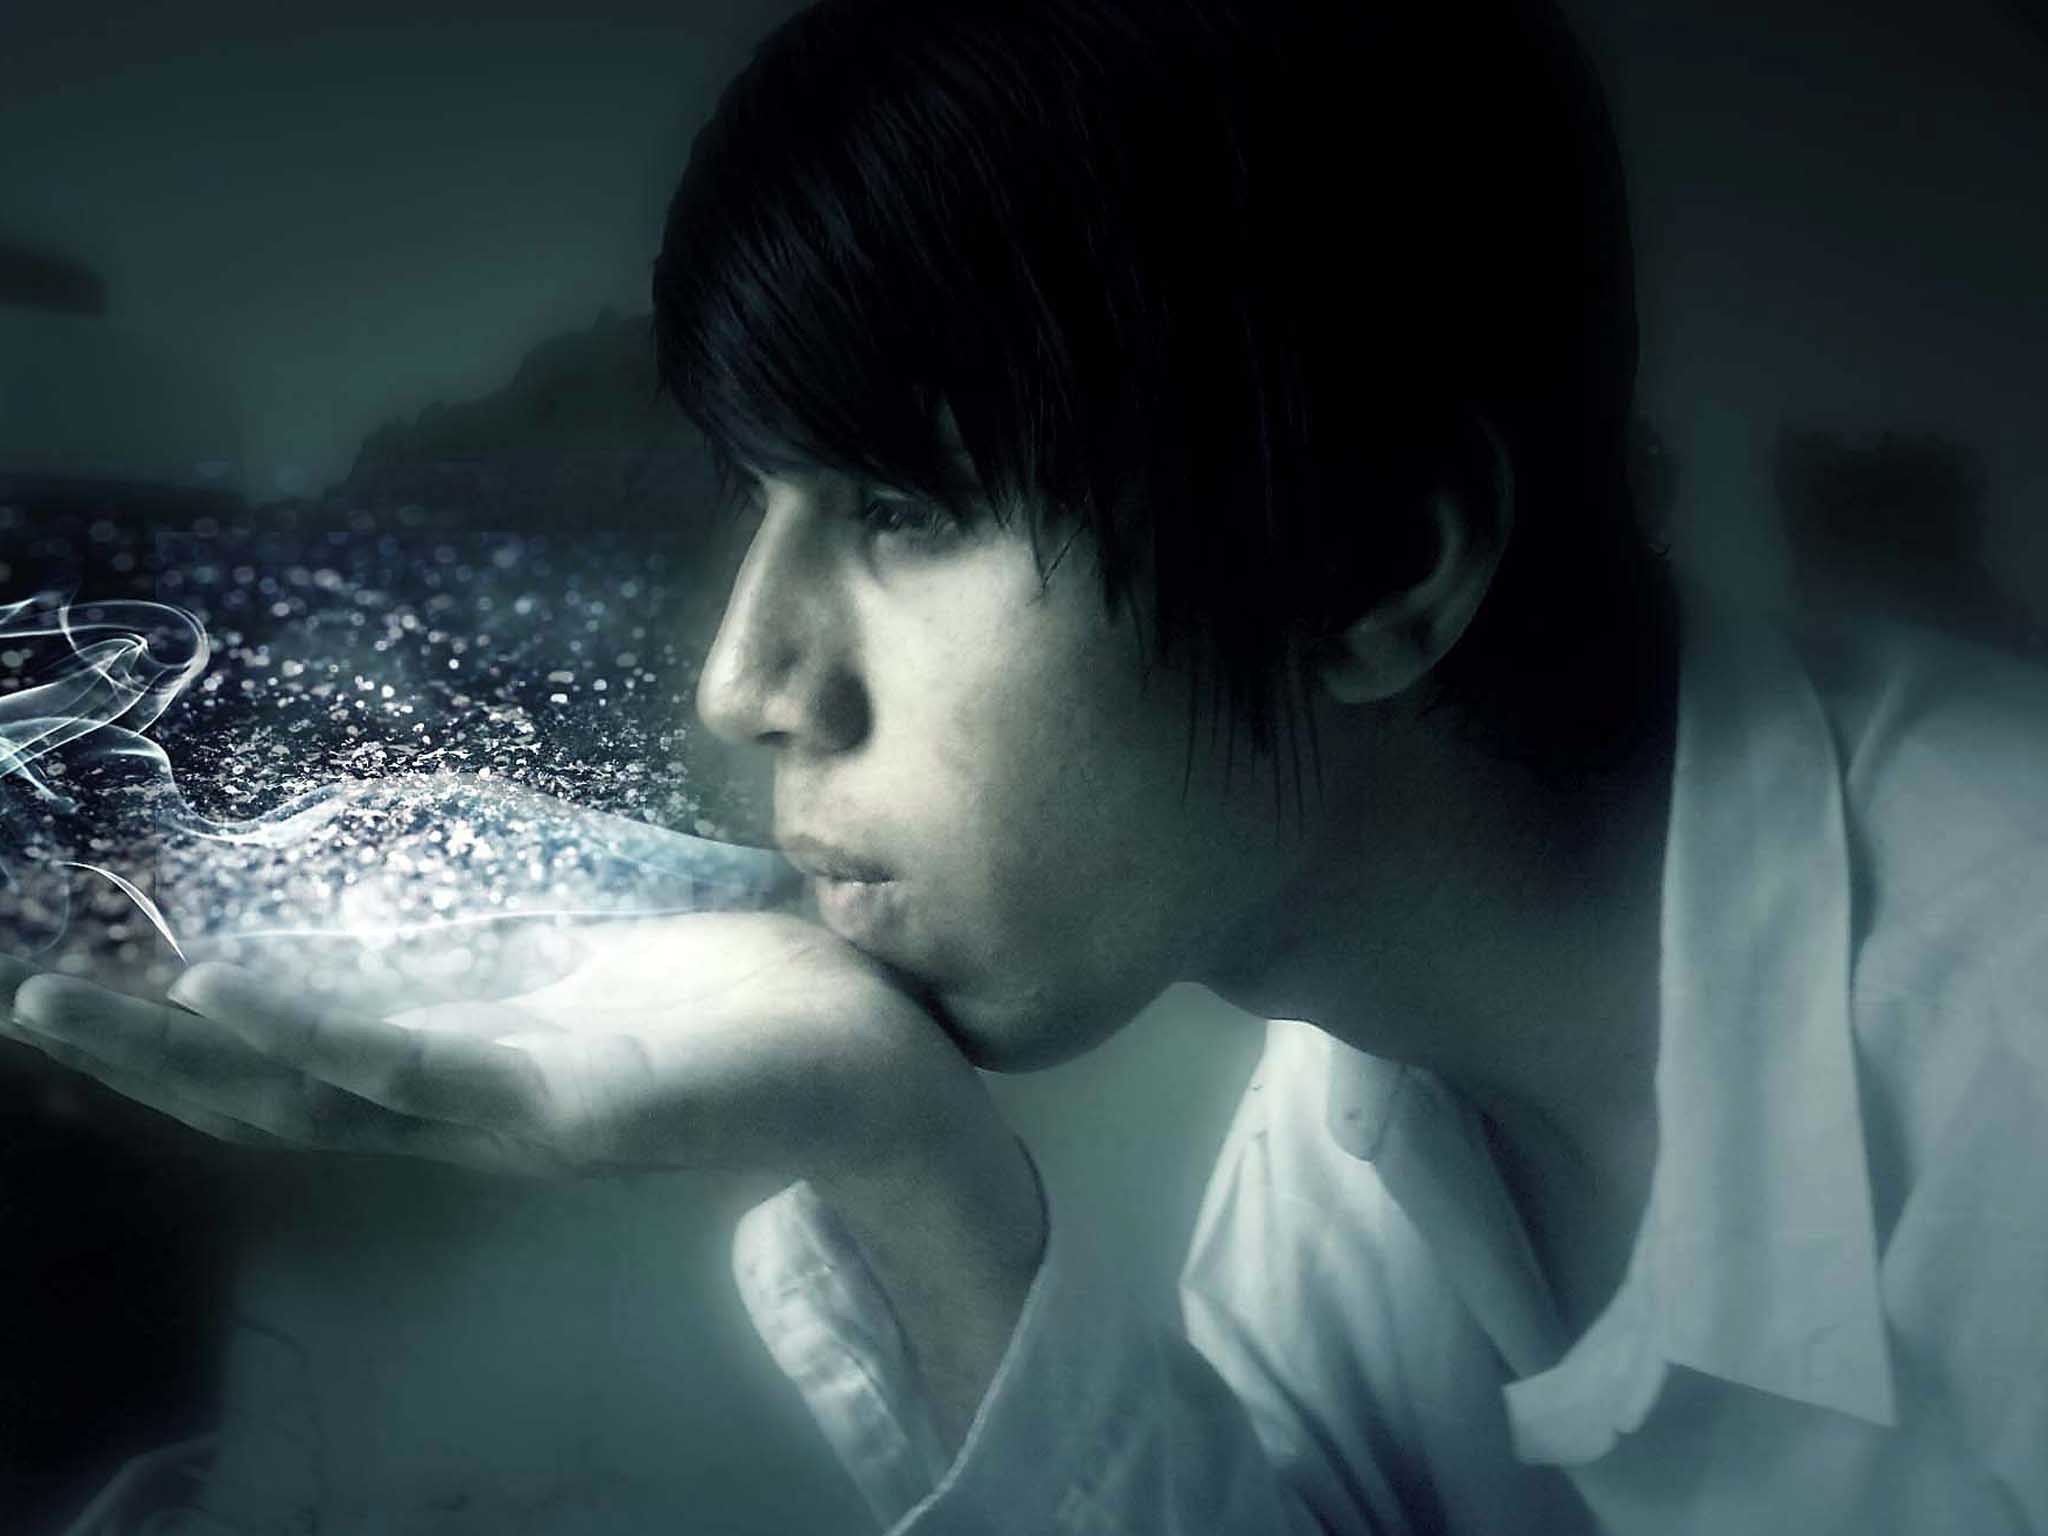 Emo Boy Latest Hd Wallpapers Free Download - Emo Boy Images Download - HD Wallpaper 